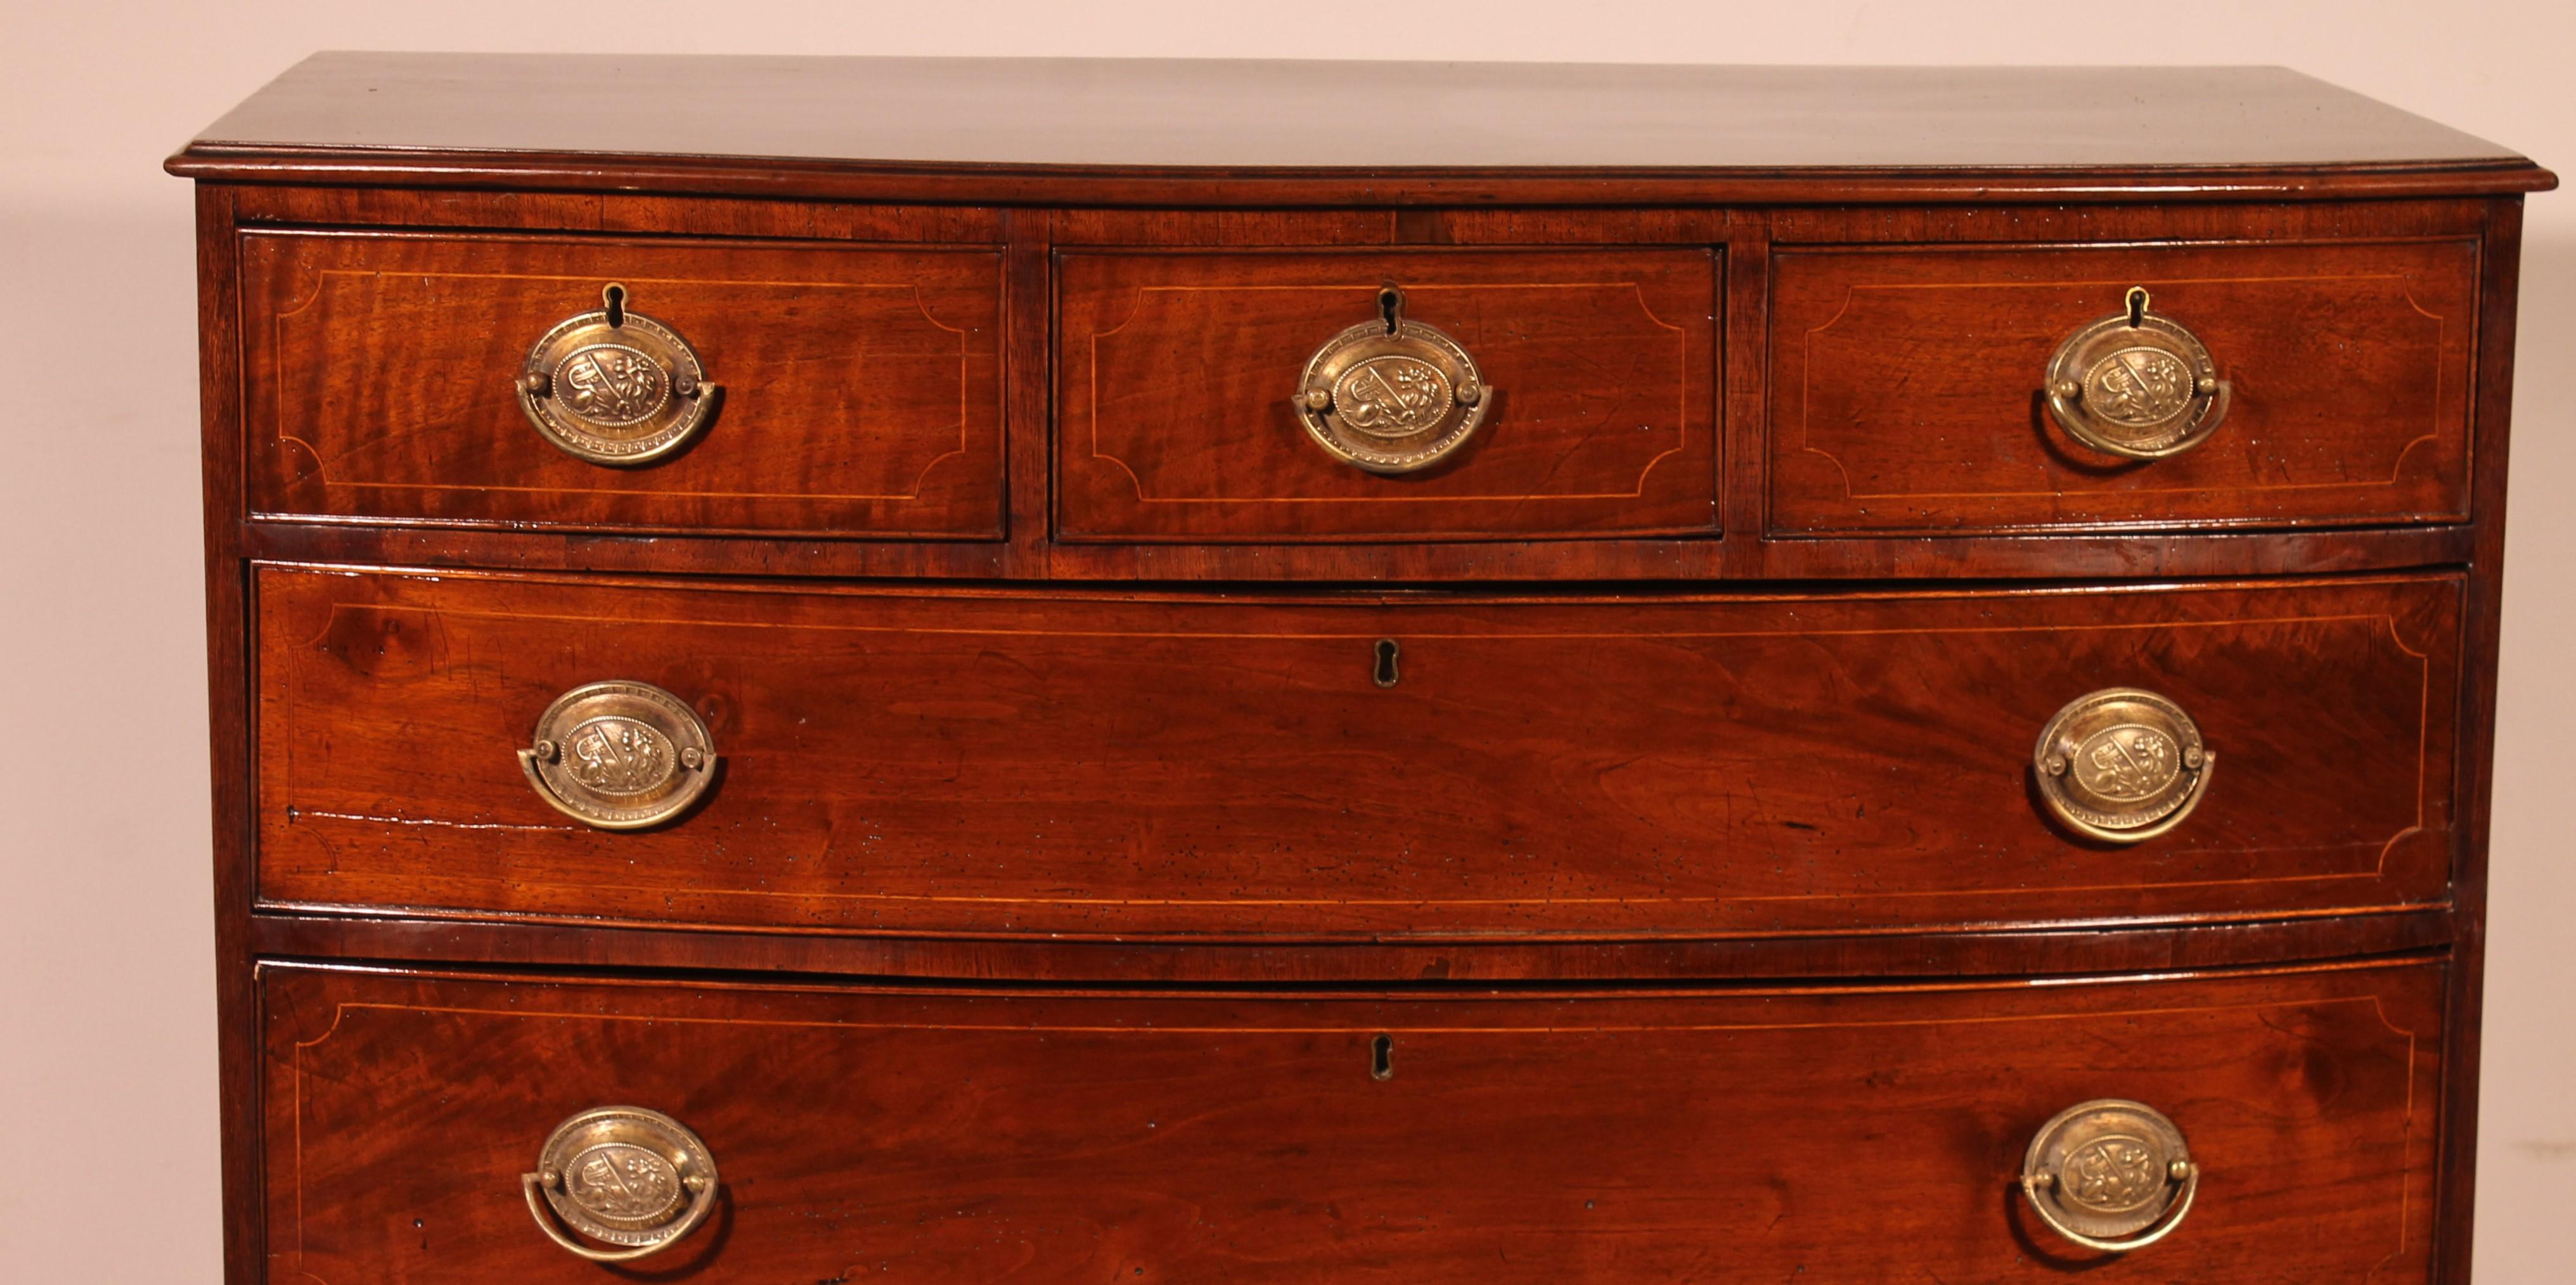 a fine and rare bowfront chest of drawers from the Regency period circa 1800 - England in mahogany

It stands out by it's very good quality with lemon inlays in the drawers as well as at the bottom.

It has 6 drawers including three at the top which